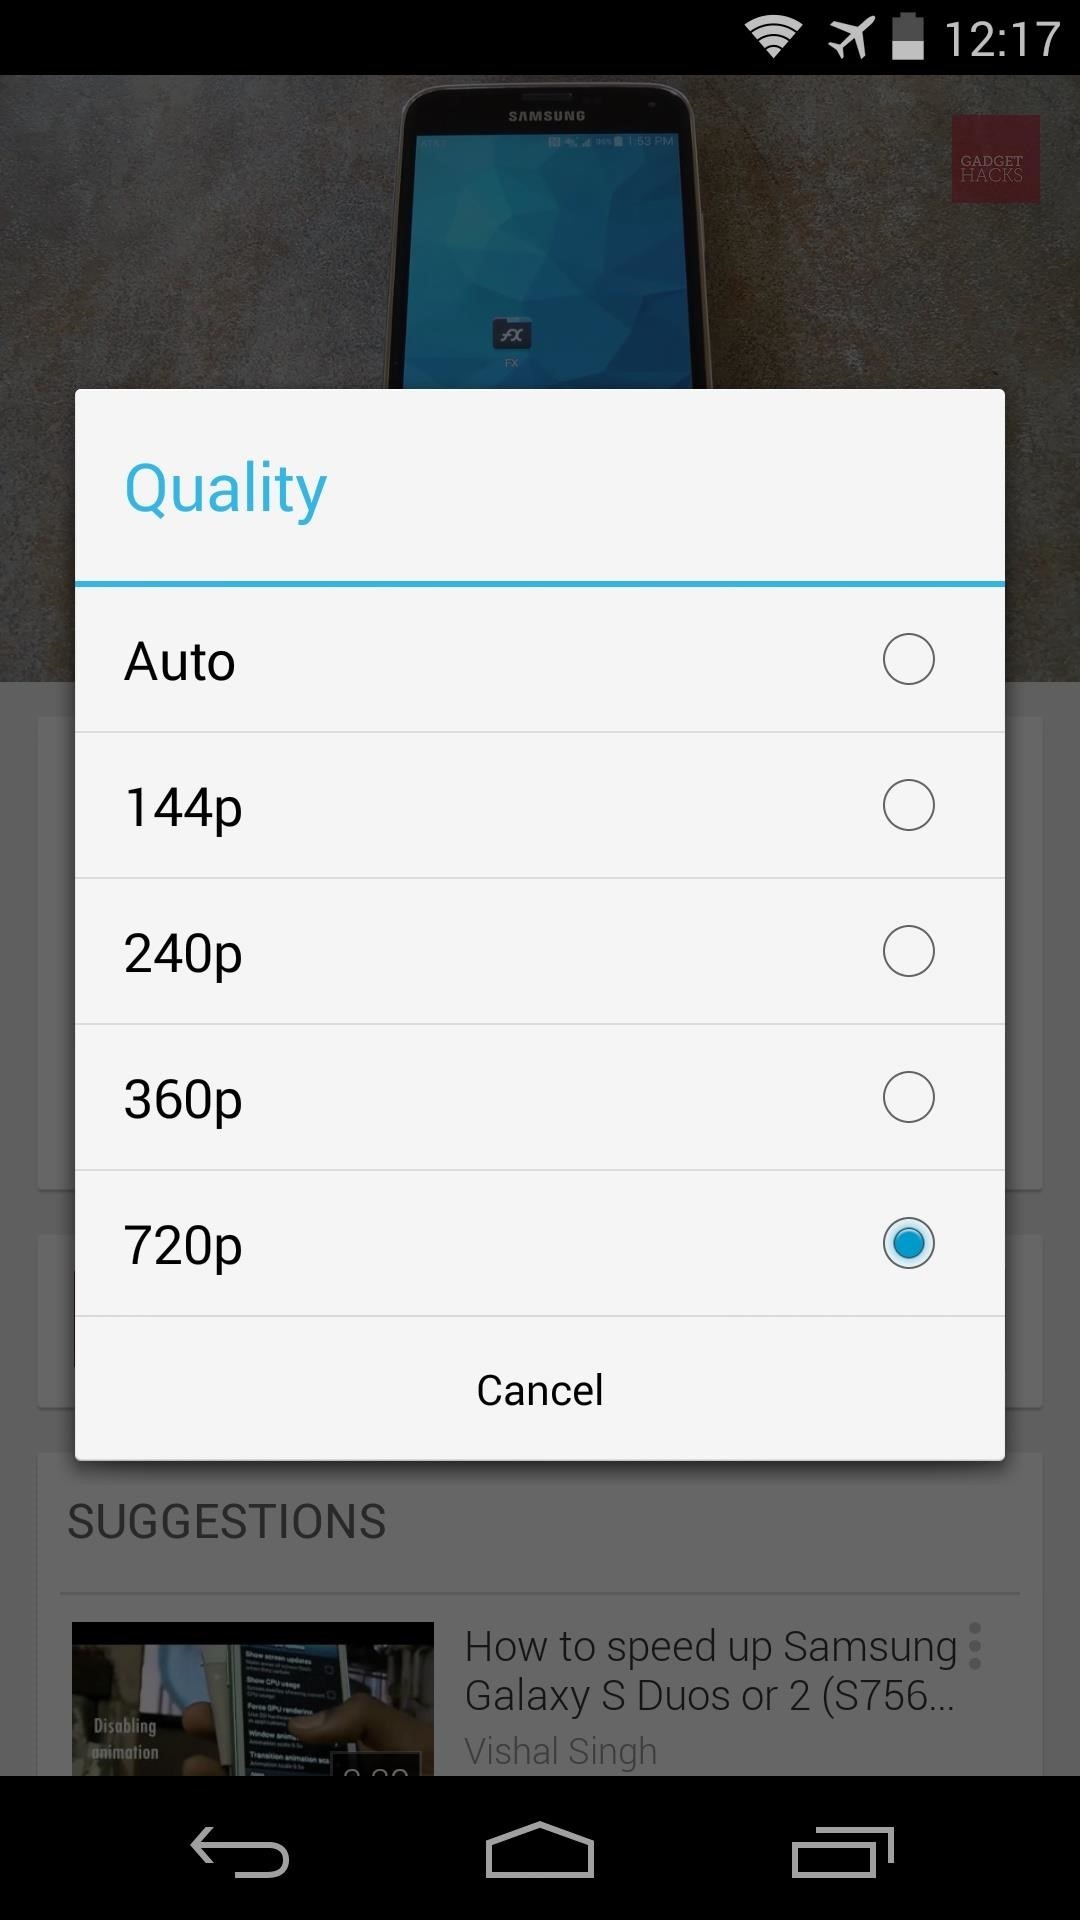 How to Watch 1080p YouTube Videos on a Nexus 5 or Nexus 7